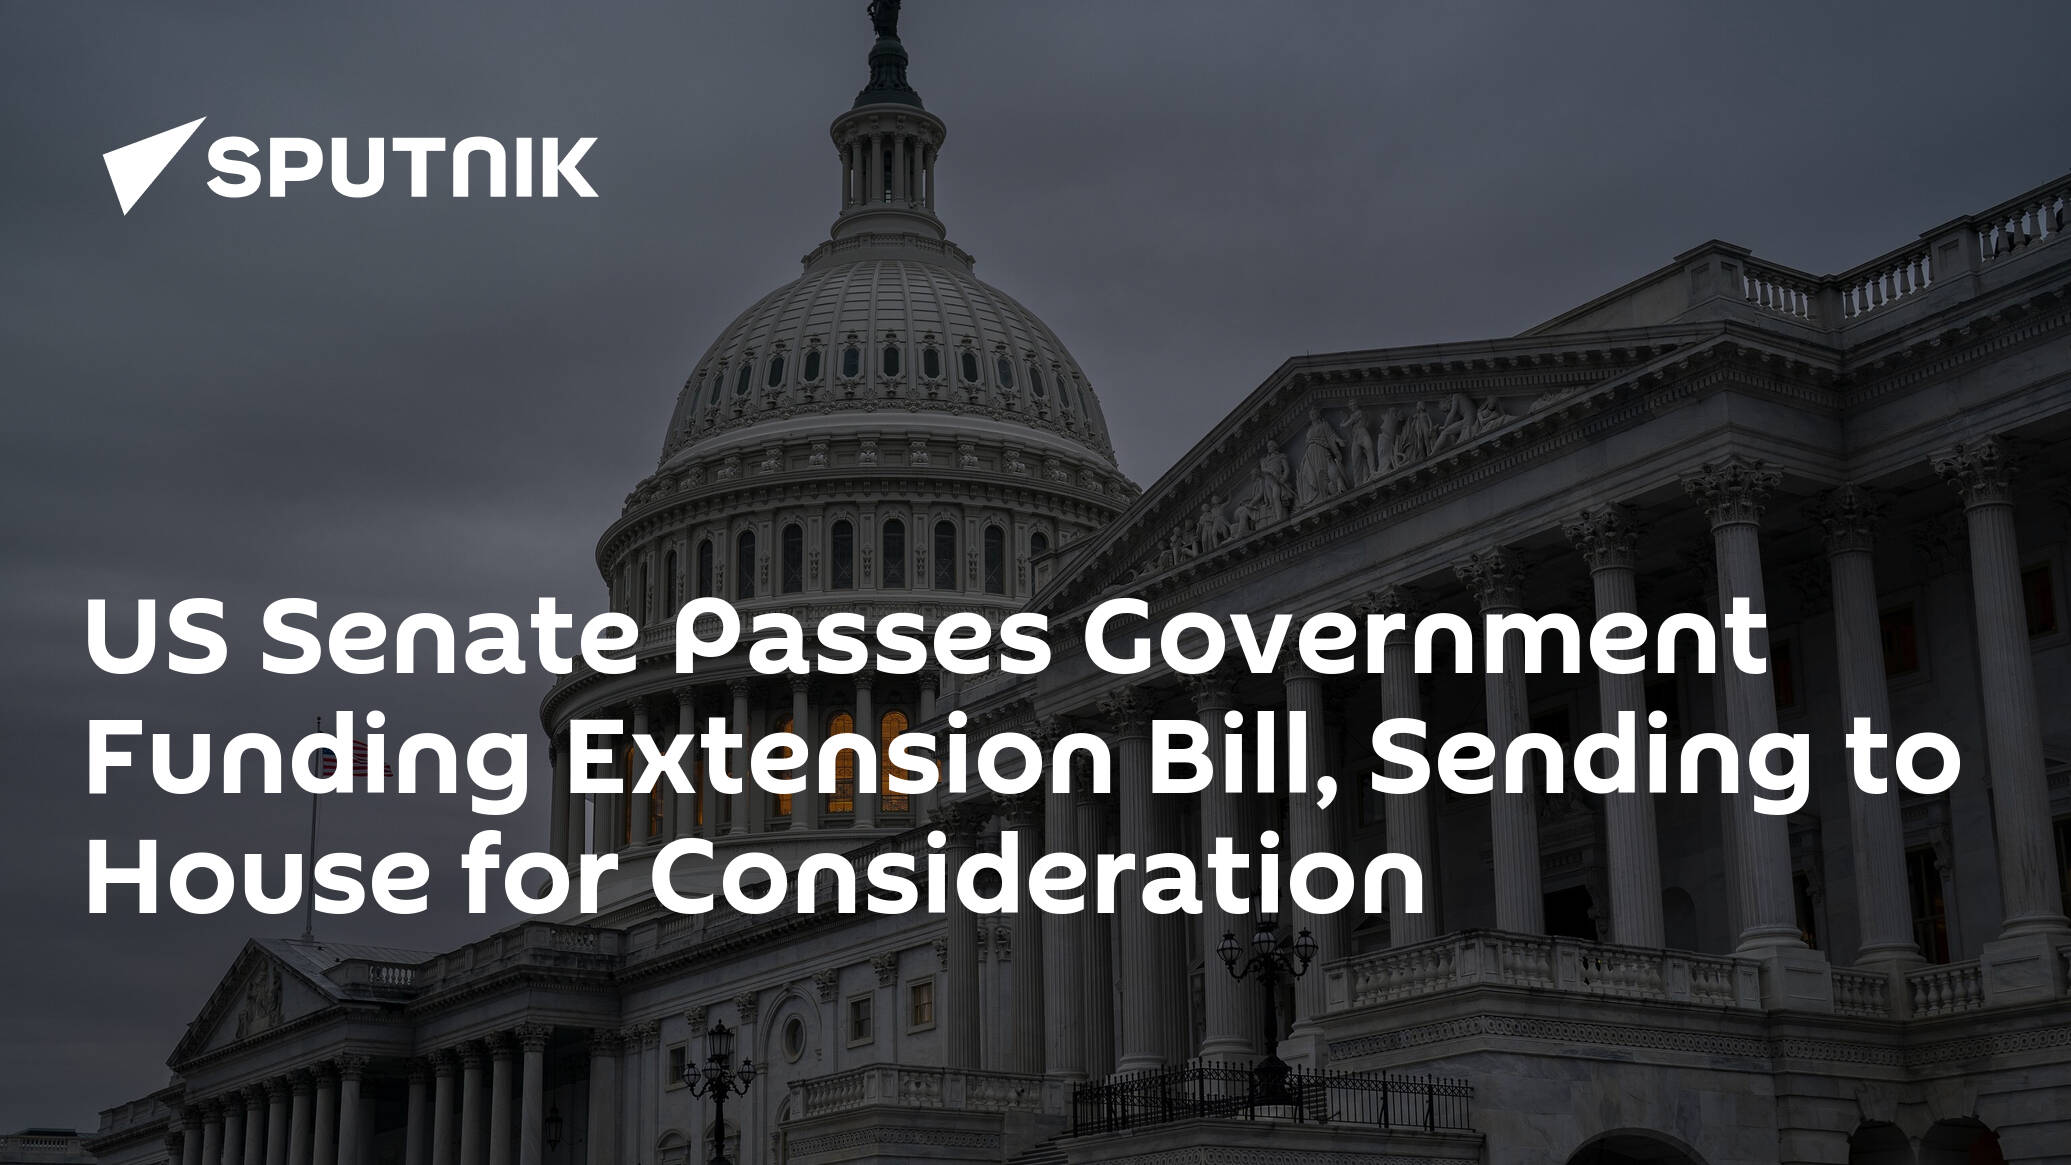 US Senate Passes Government Funding Extension Bill, Sending to House for Consideration